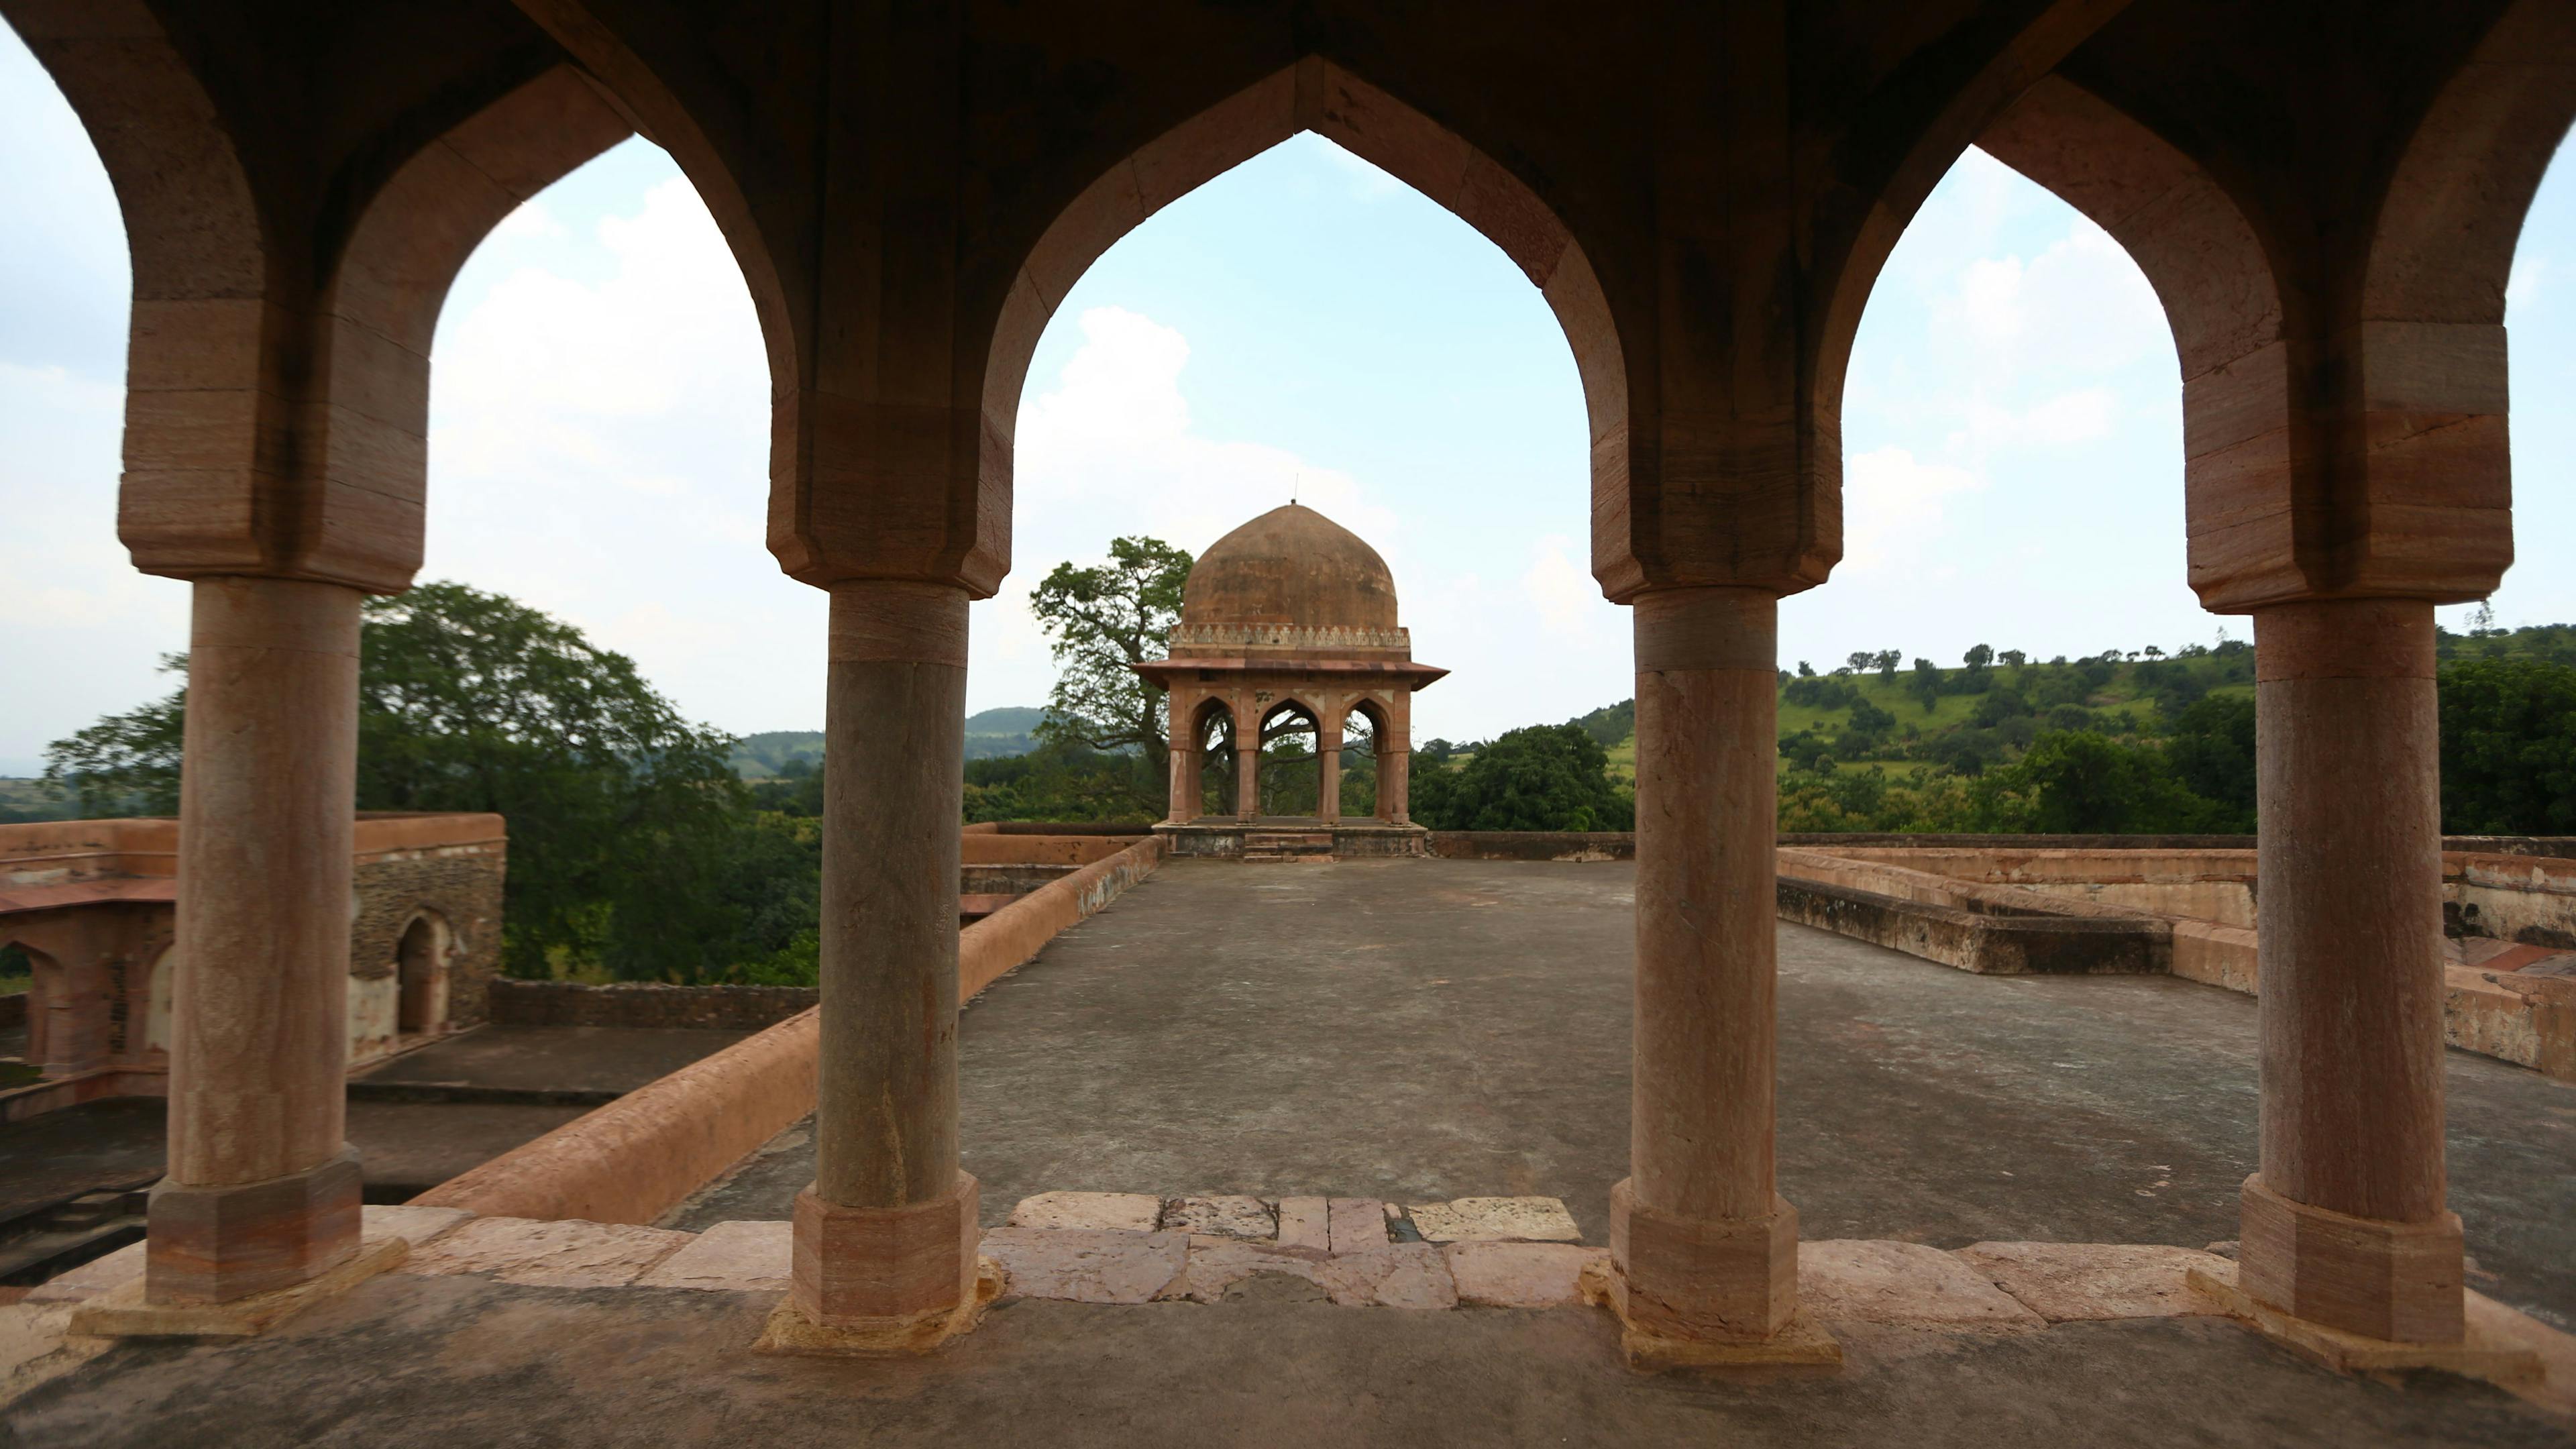 A view of Roopmati’s Pavilion